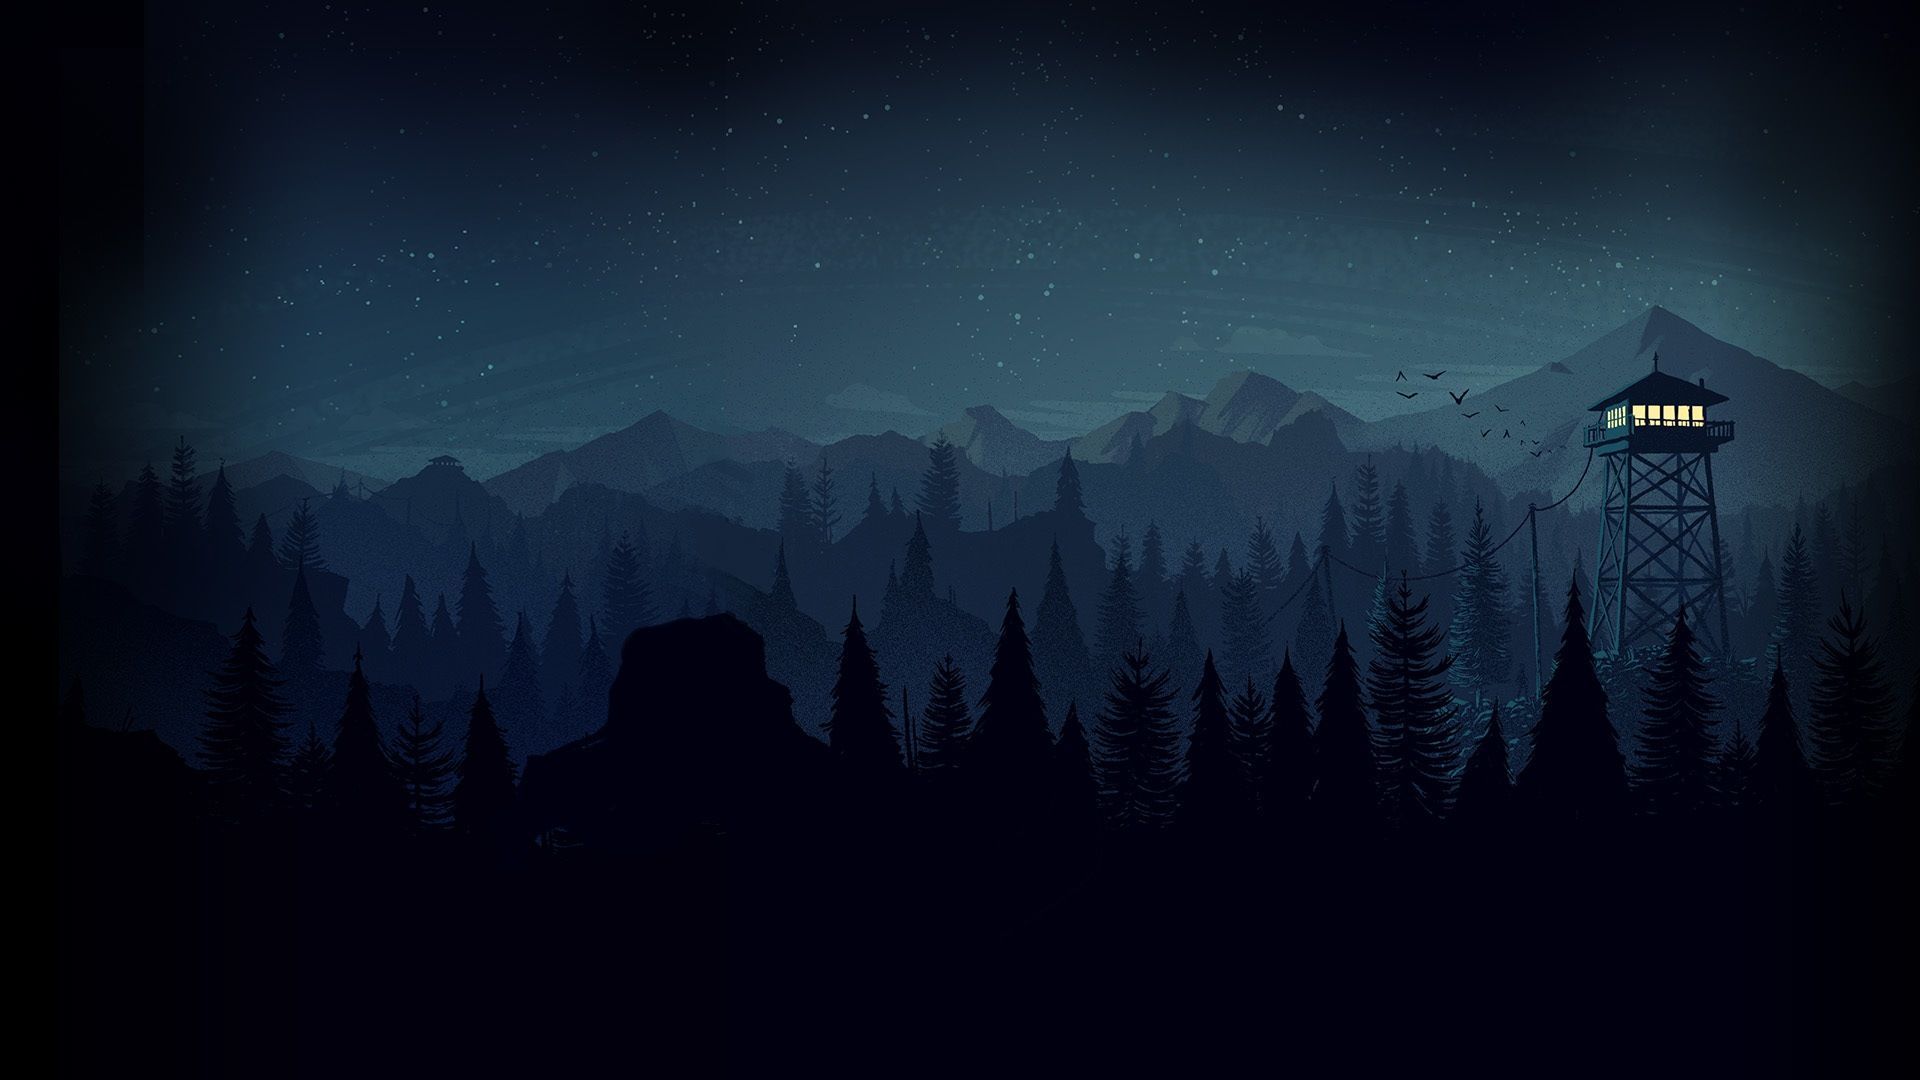 Firewatch Live Wallpaper 4K Upscale by FortuN on Make a GIF